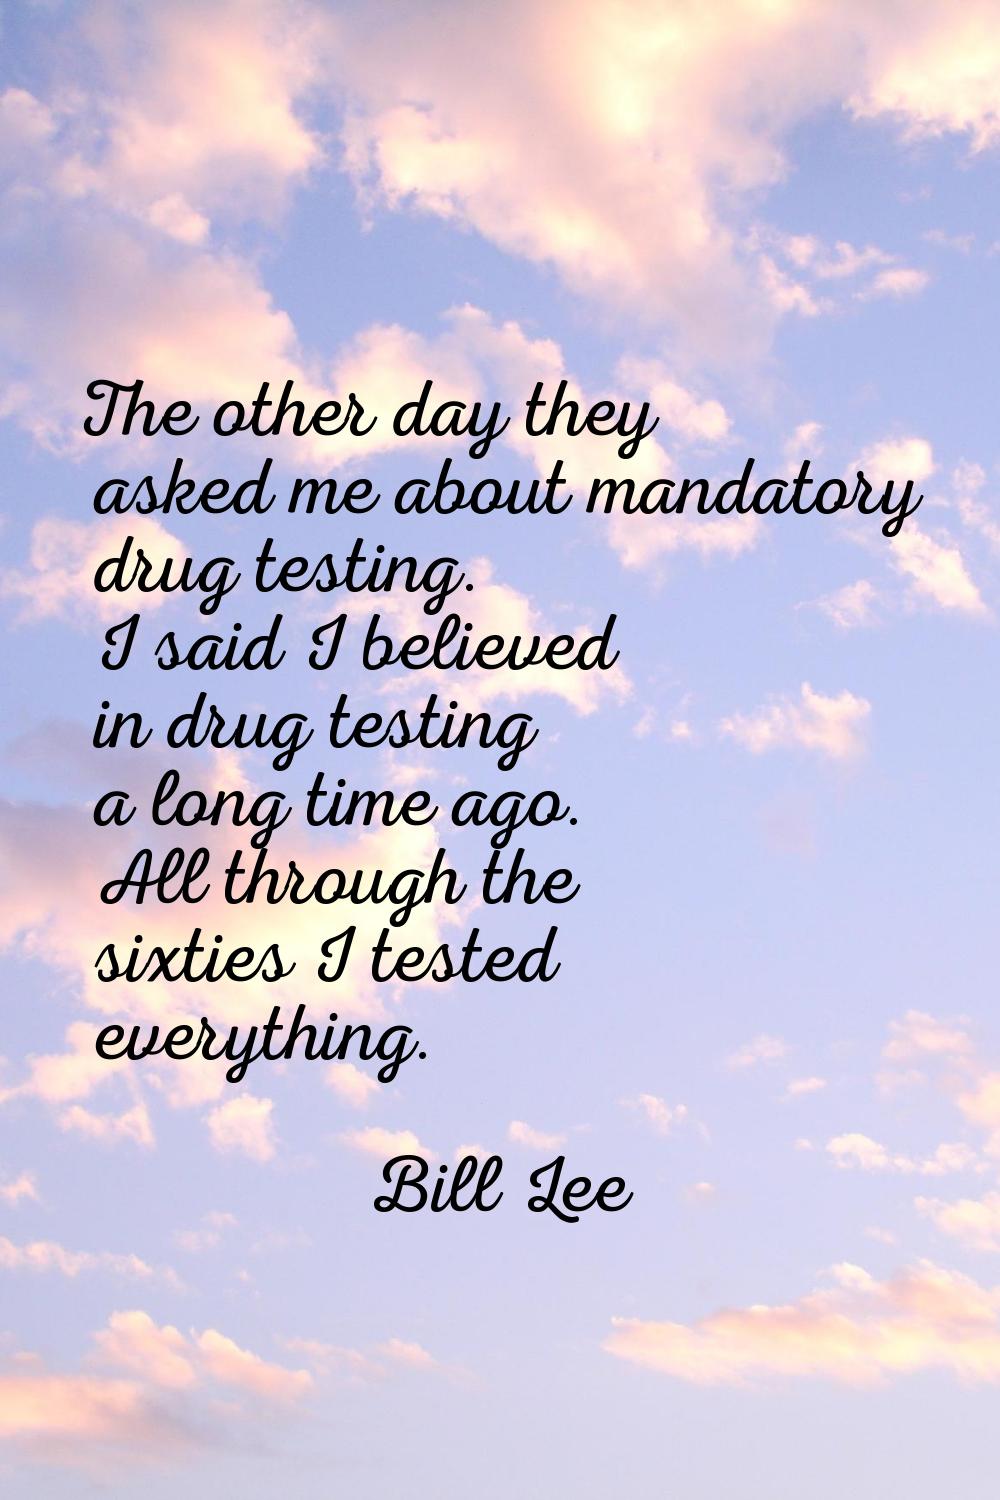 The other day they asked me about mandatory drug testing. I said I believed in drug testing a long 